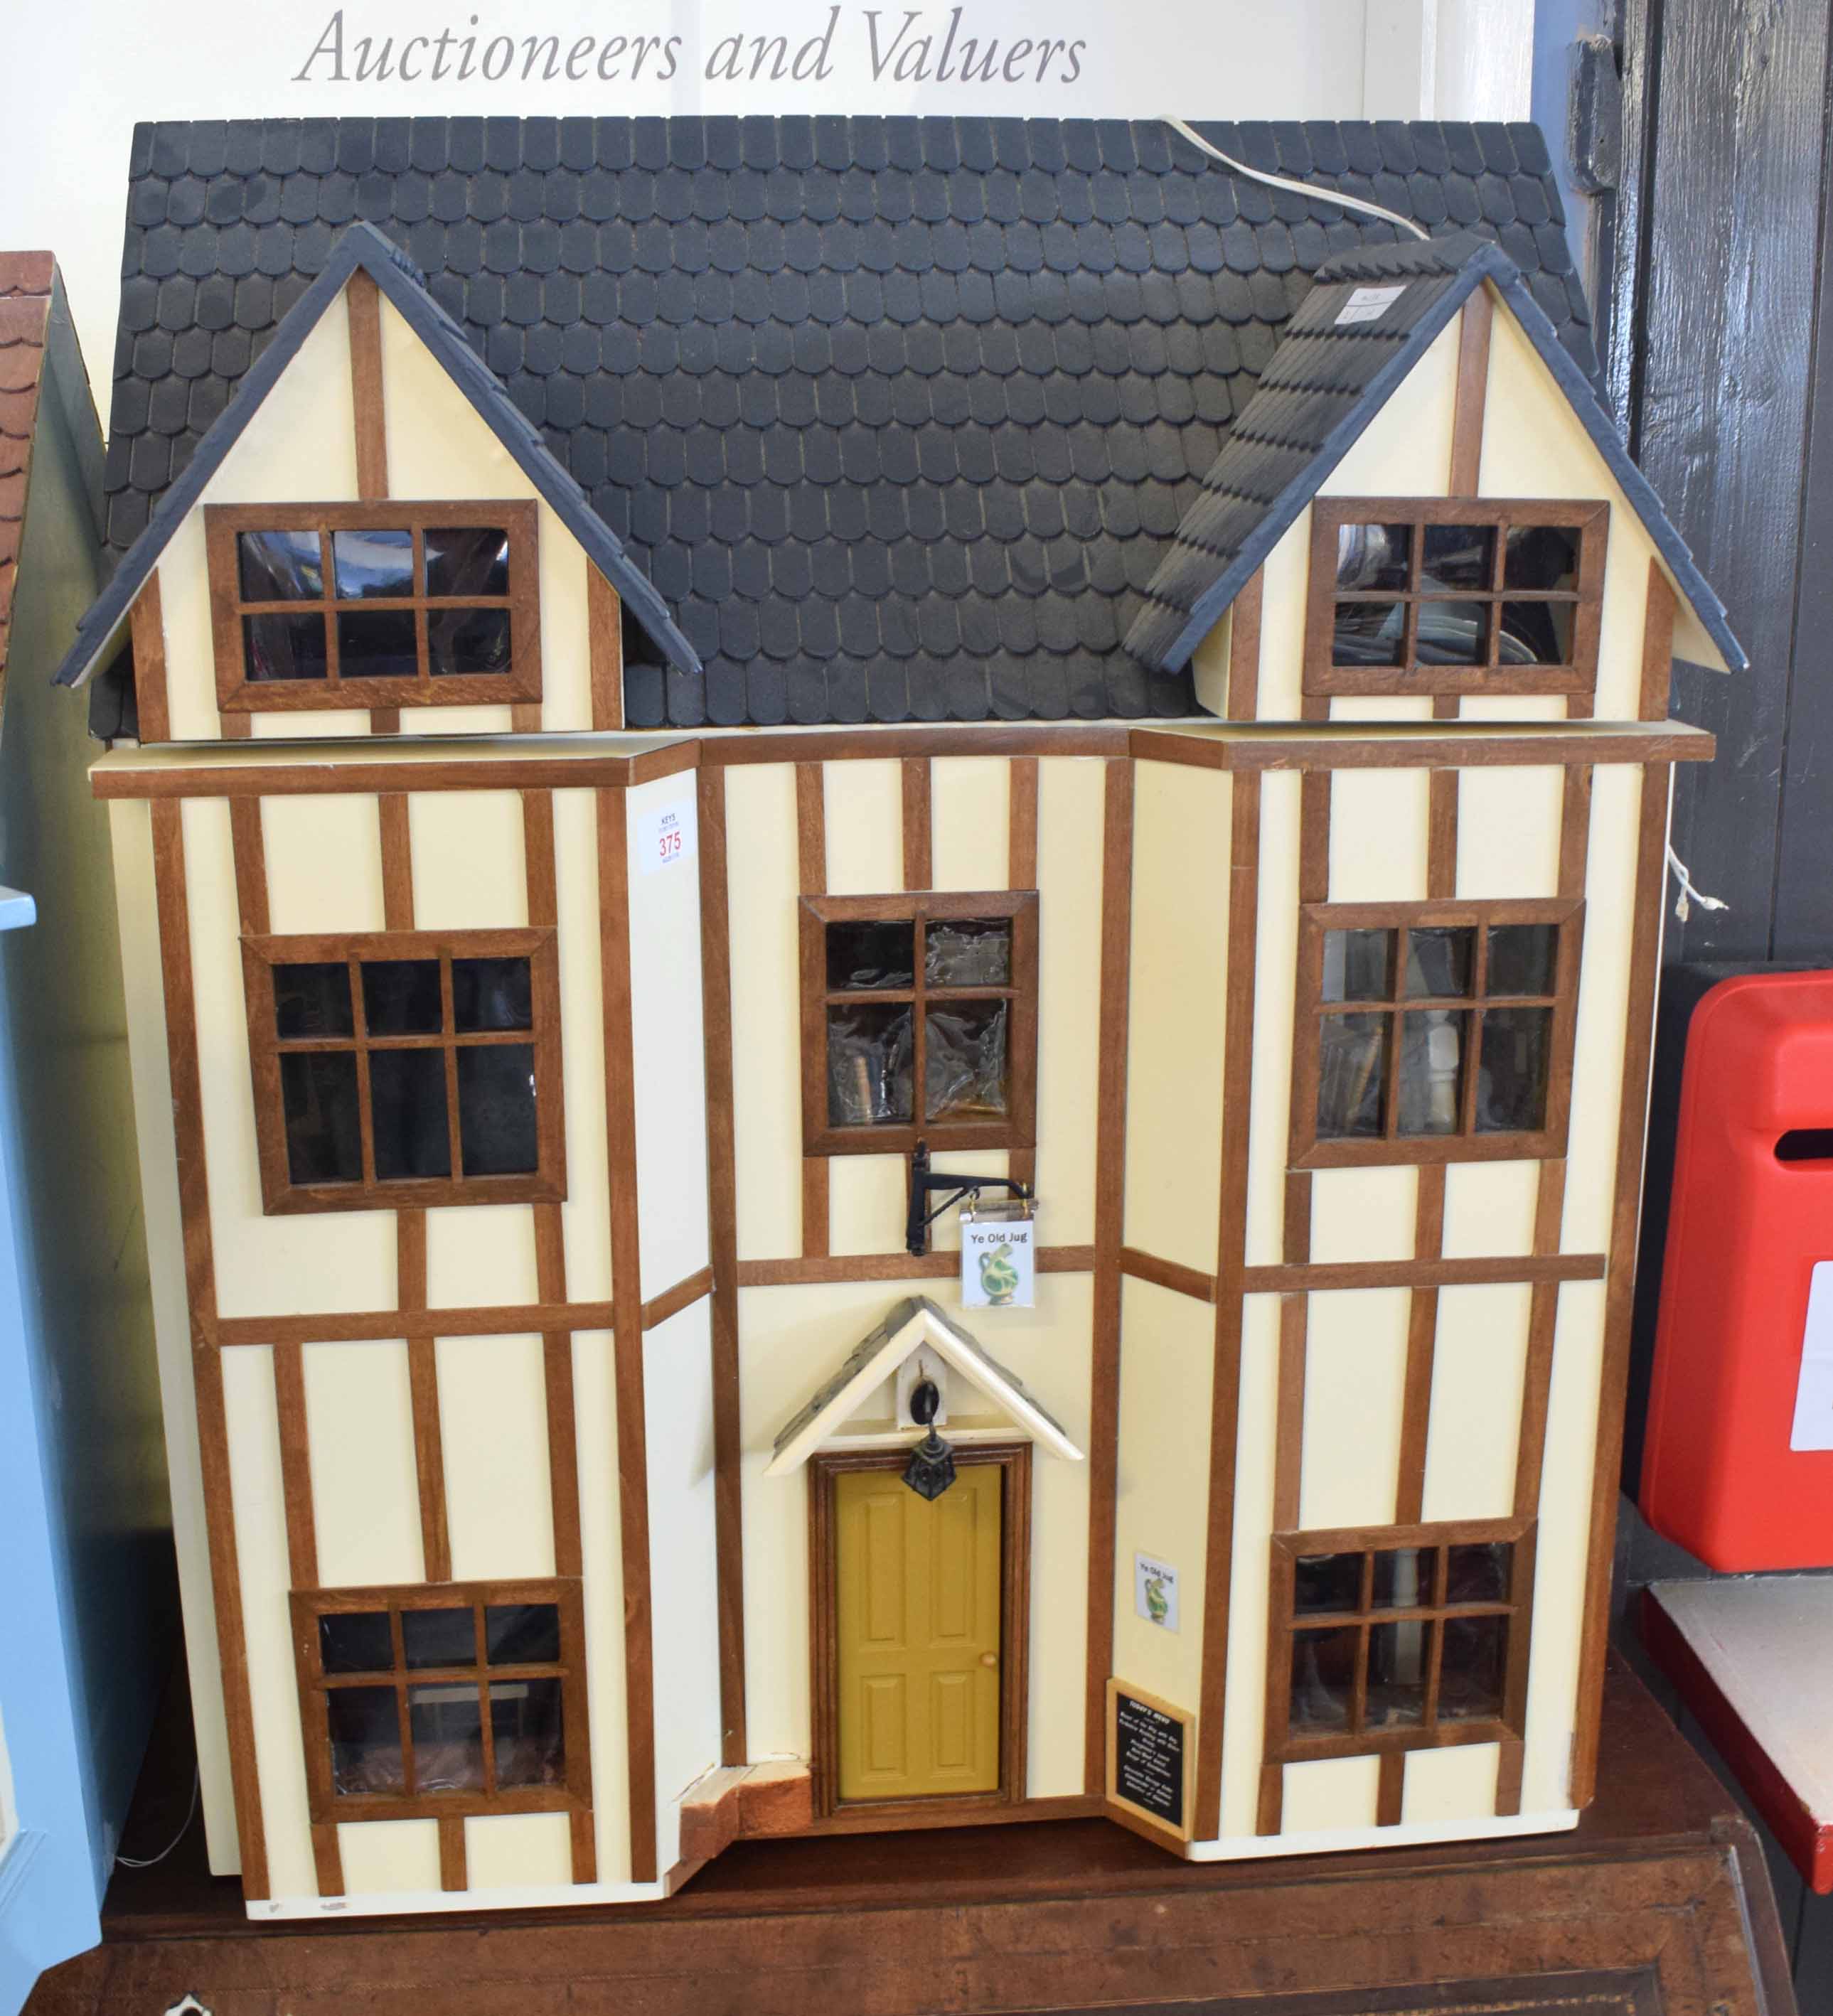 Modern kit dolls house "Ye Old Jug", opening front enclosing four rooms with two staircases,